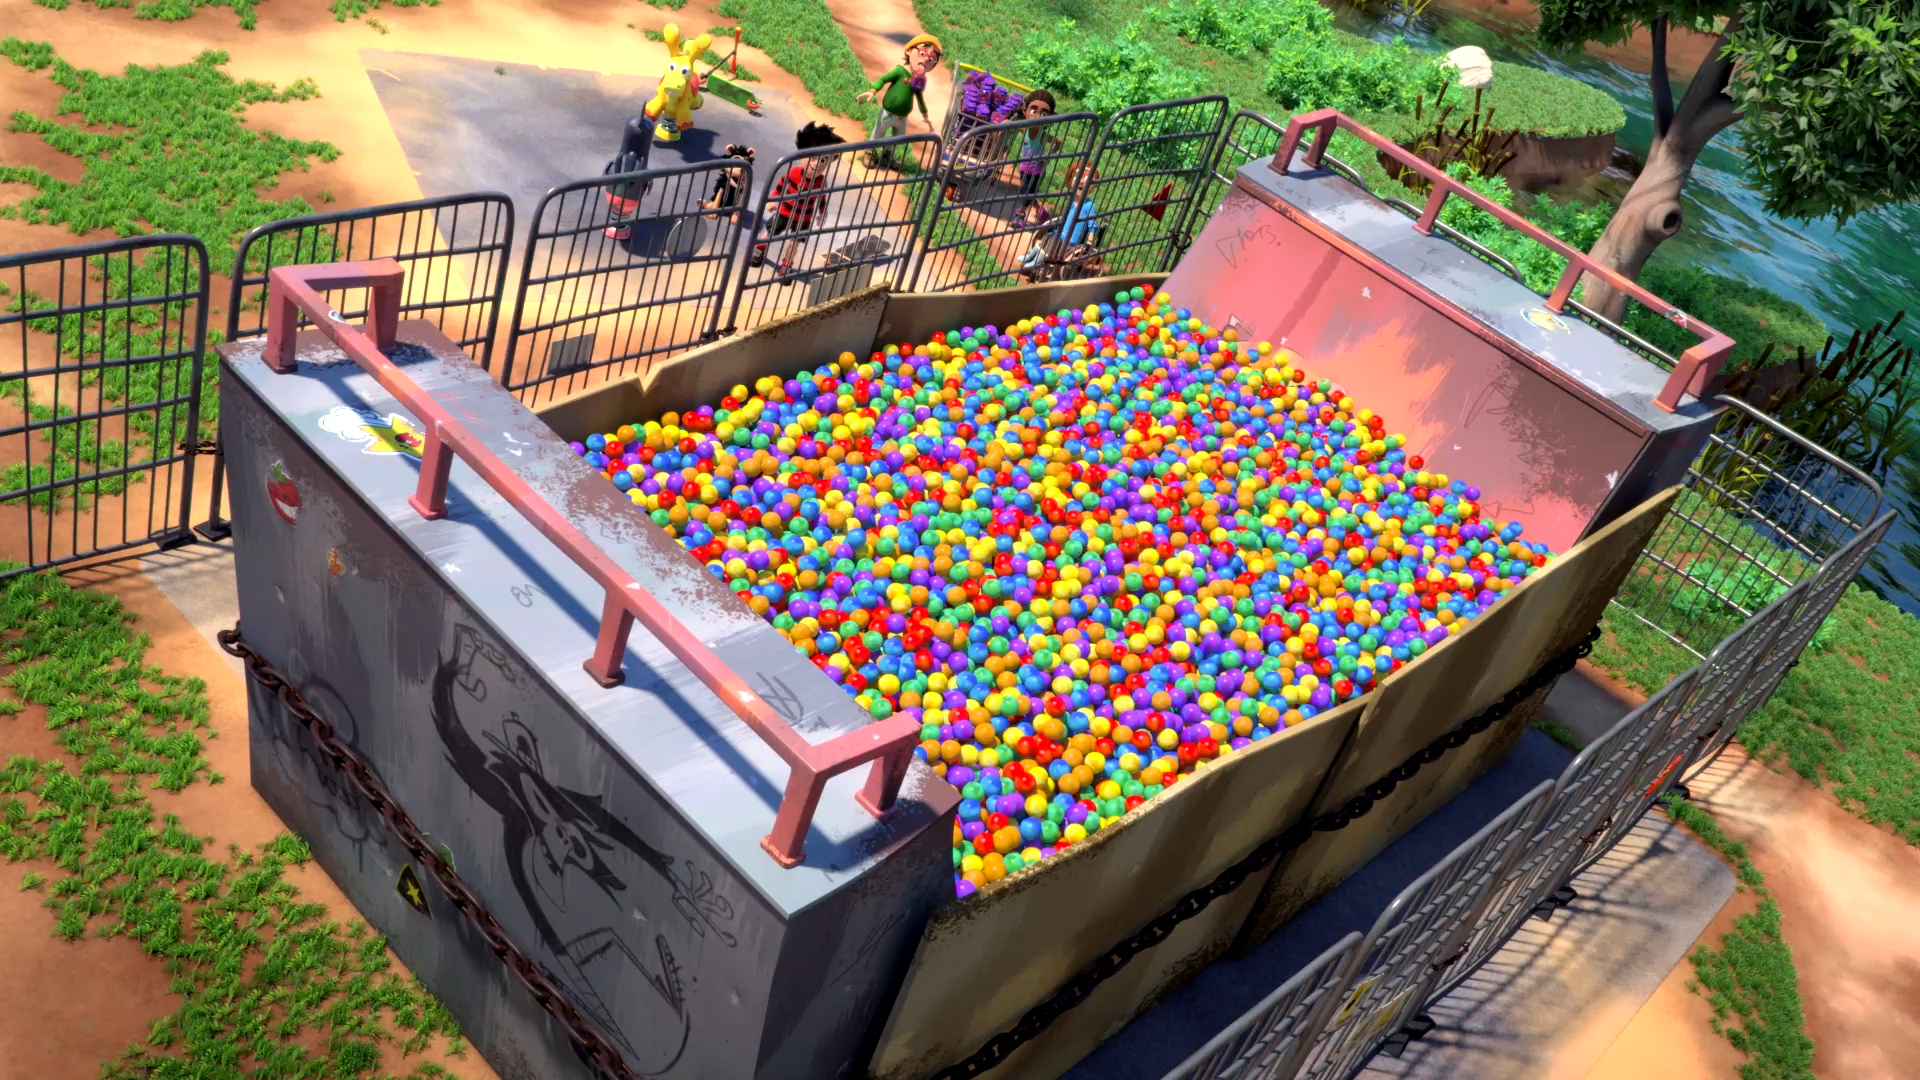 The half pipe is a now a ball pool